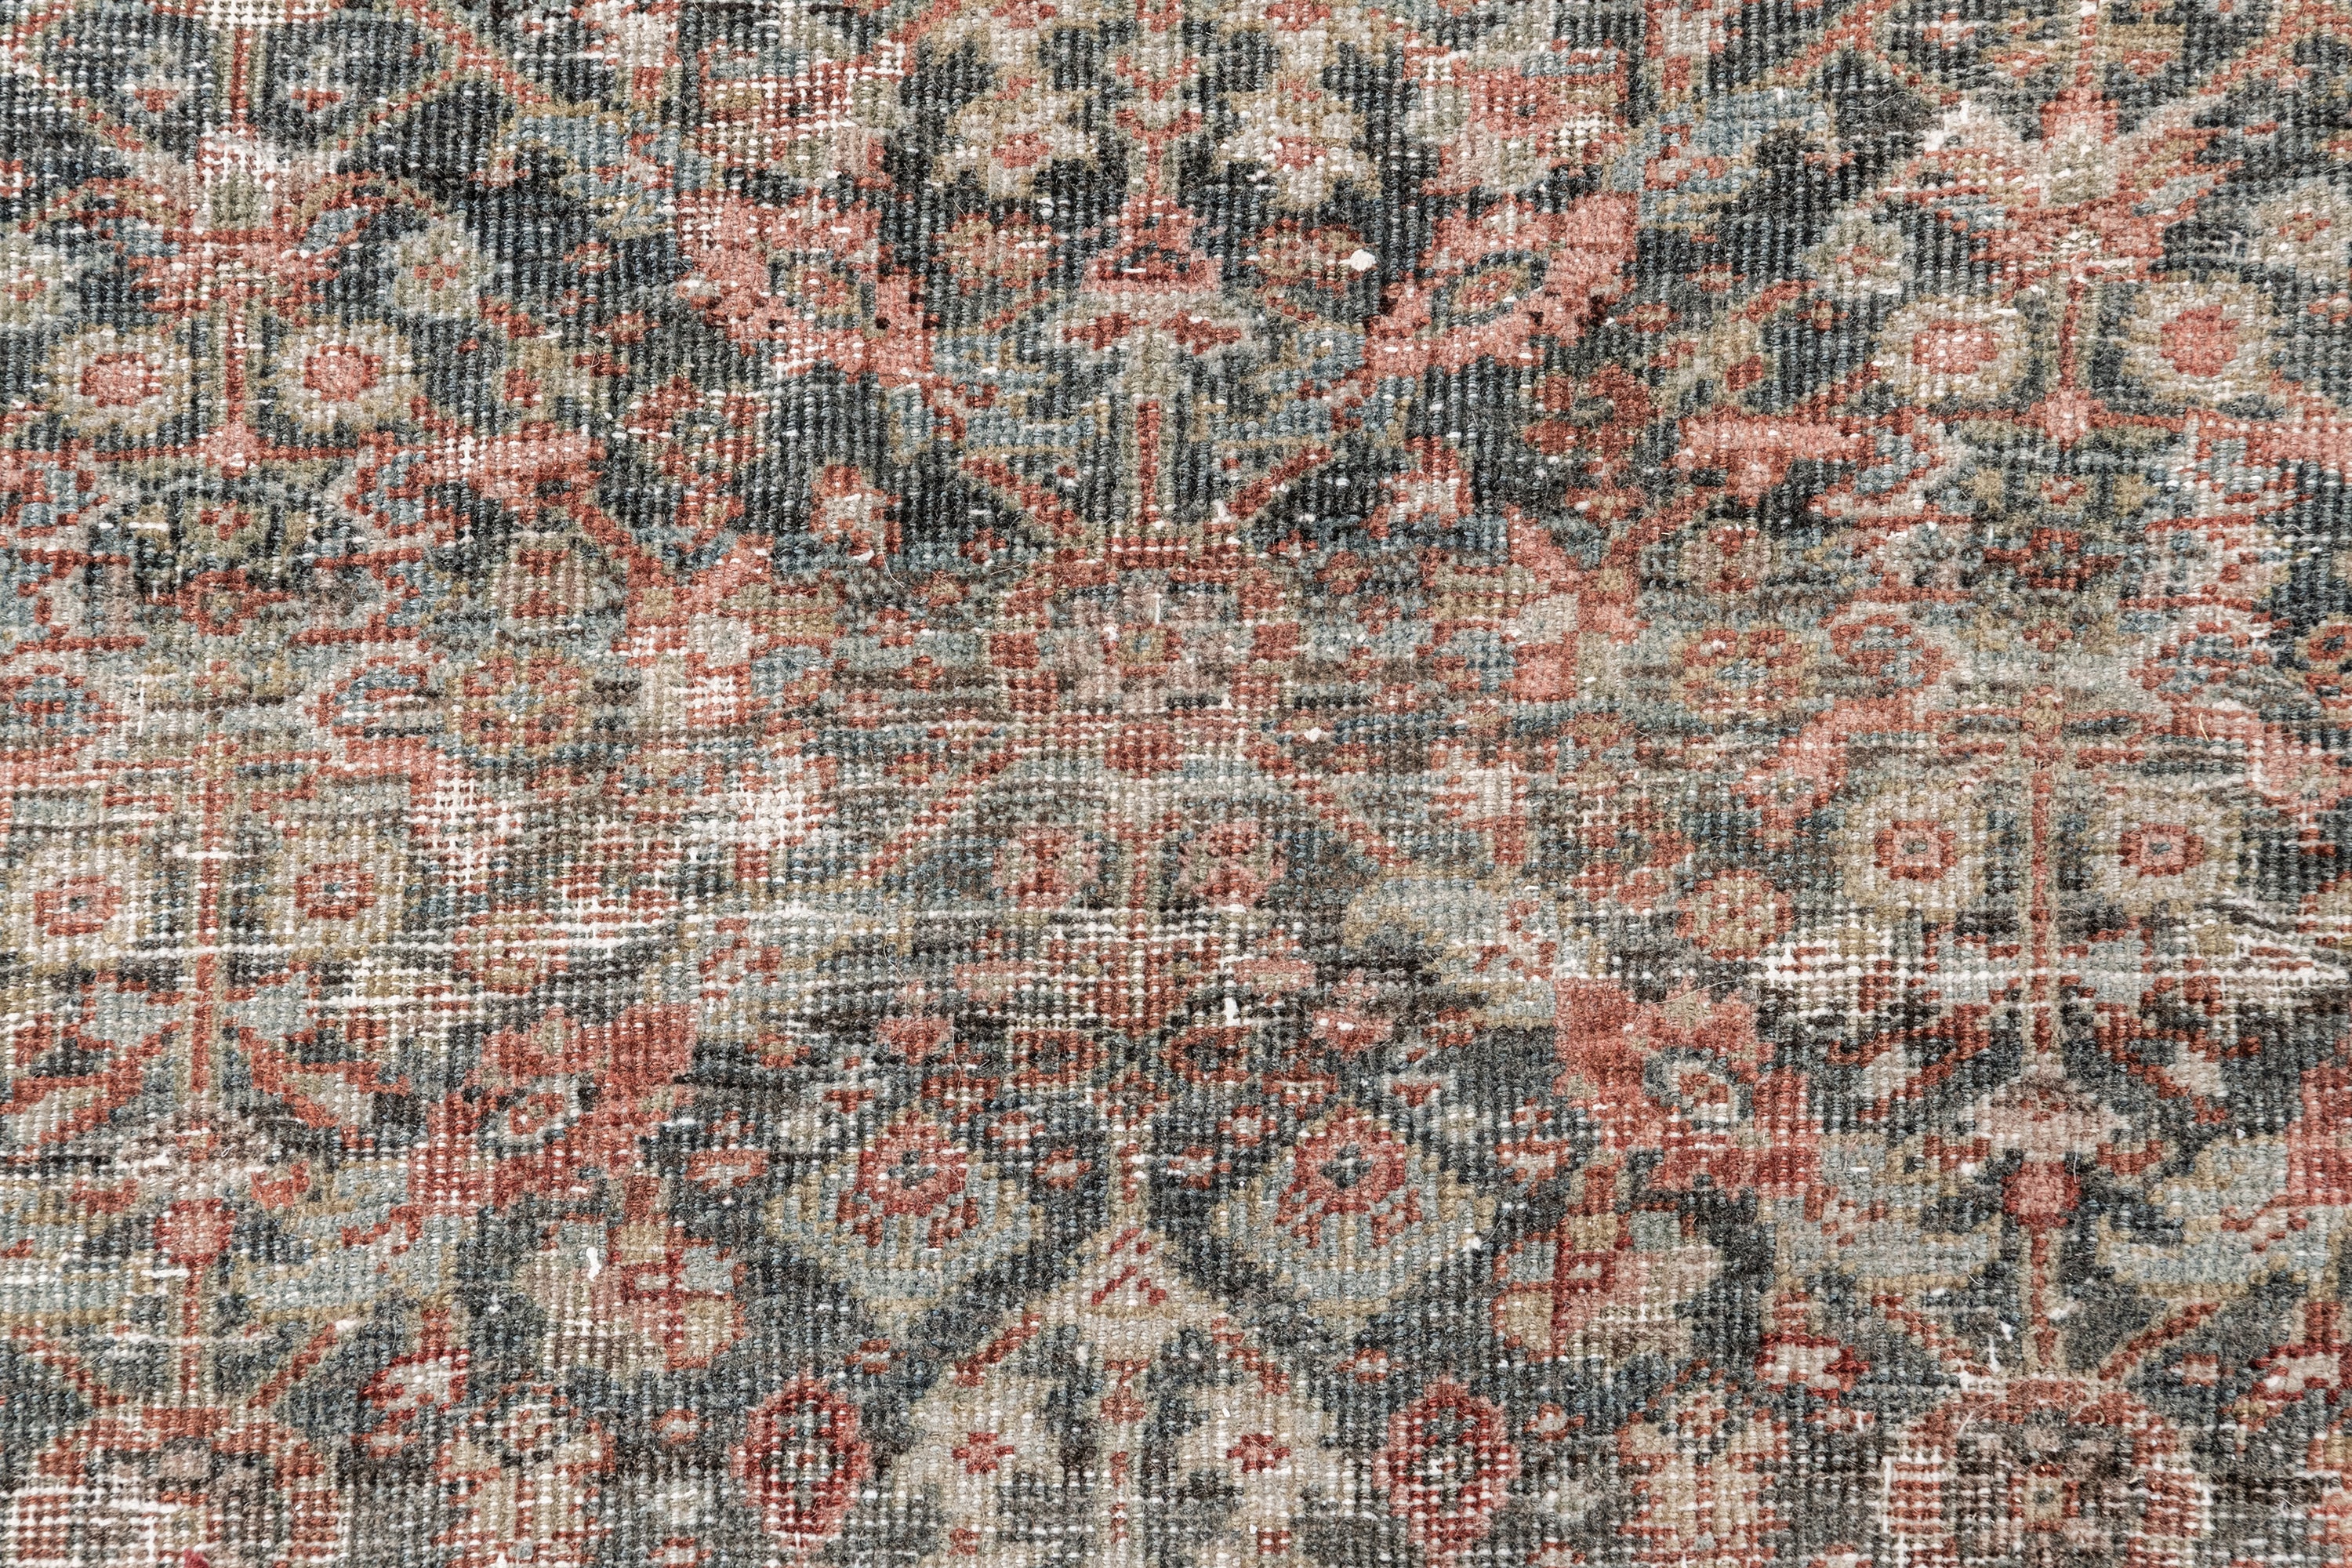 SULTANABAD RUG, AR31268, WEST PERSIA, 15'3" X 24'4" - thumbnail 6